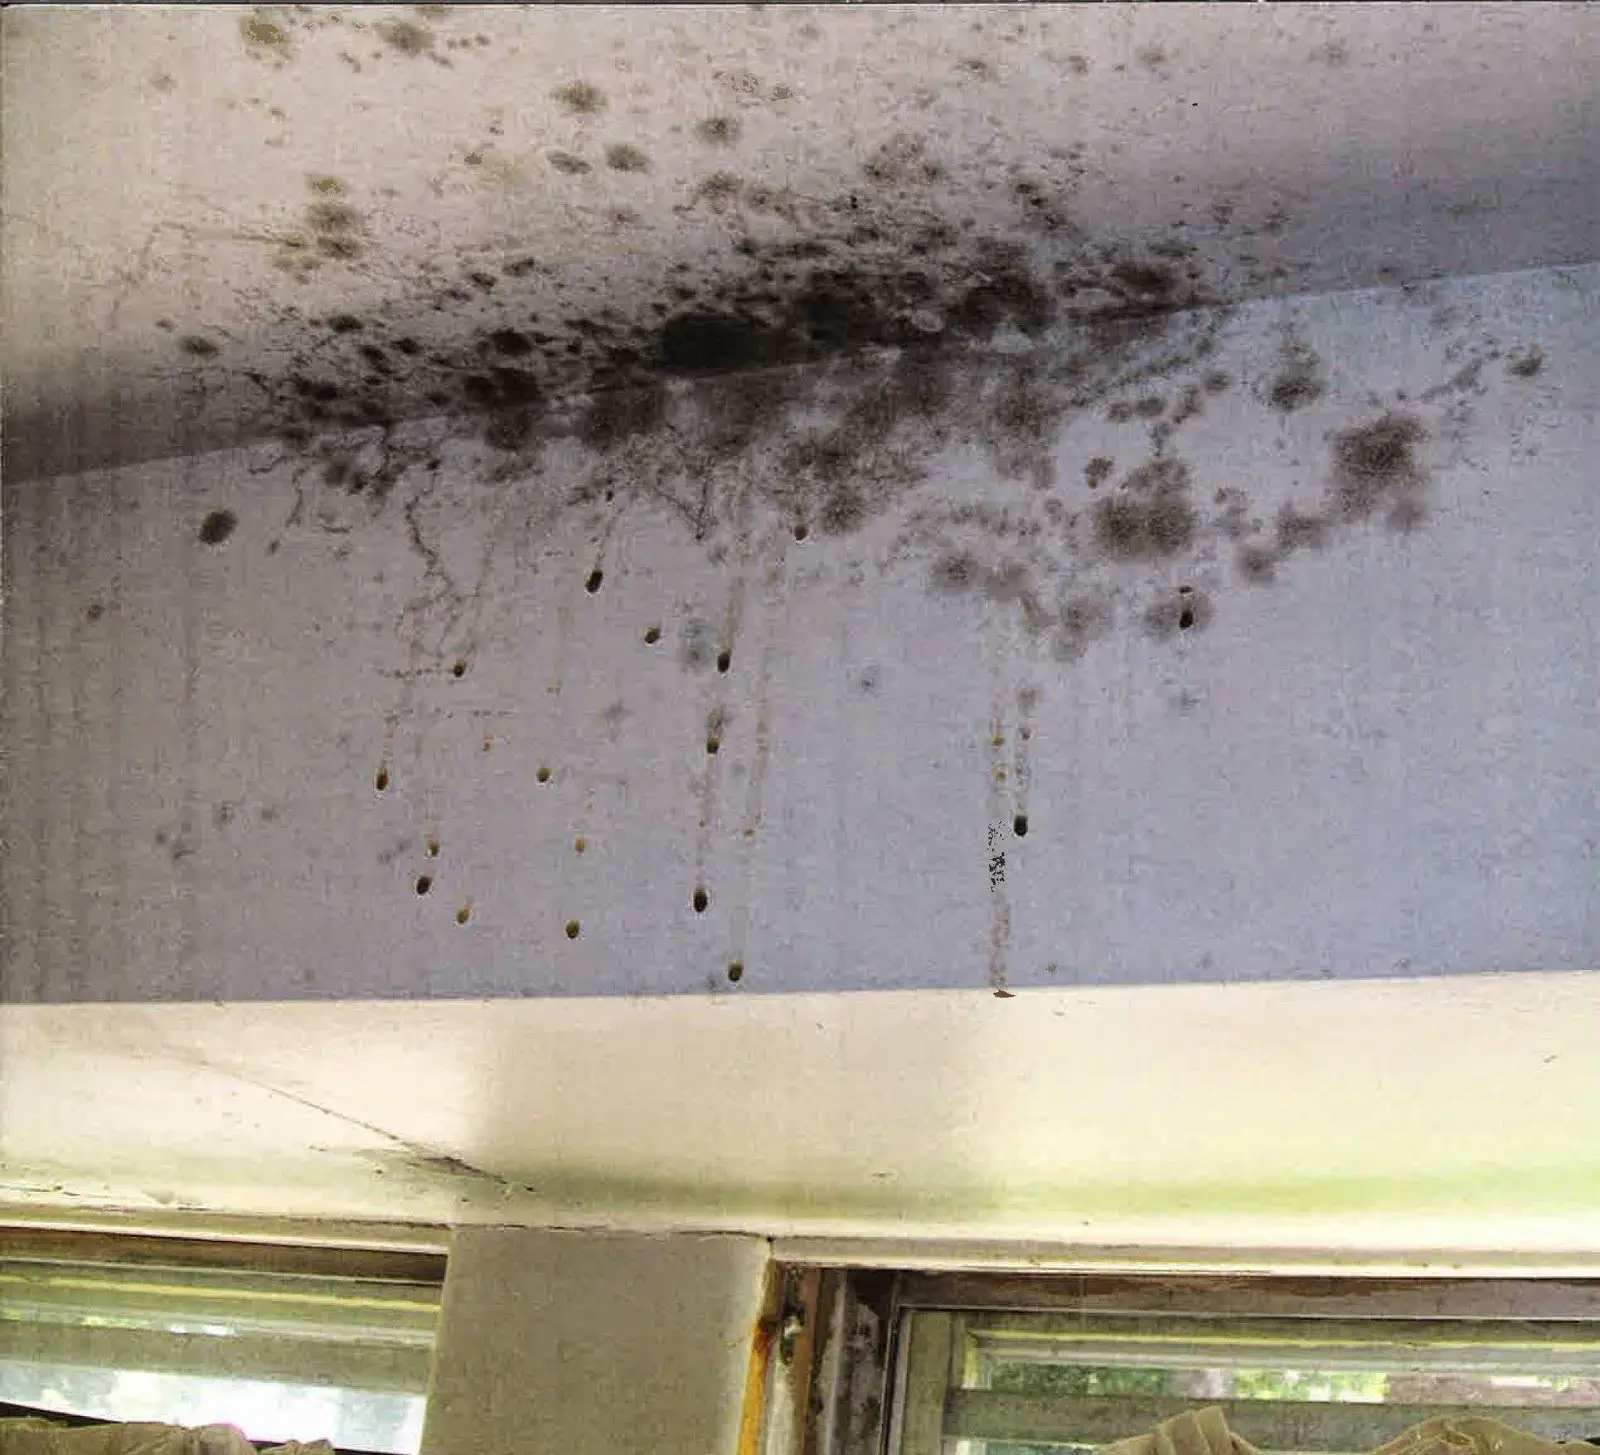 Can I Sue My Landlord For Mold Exposure